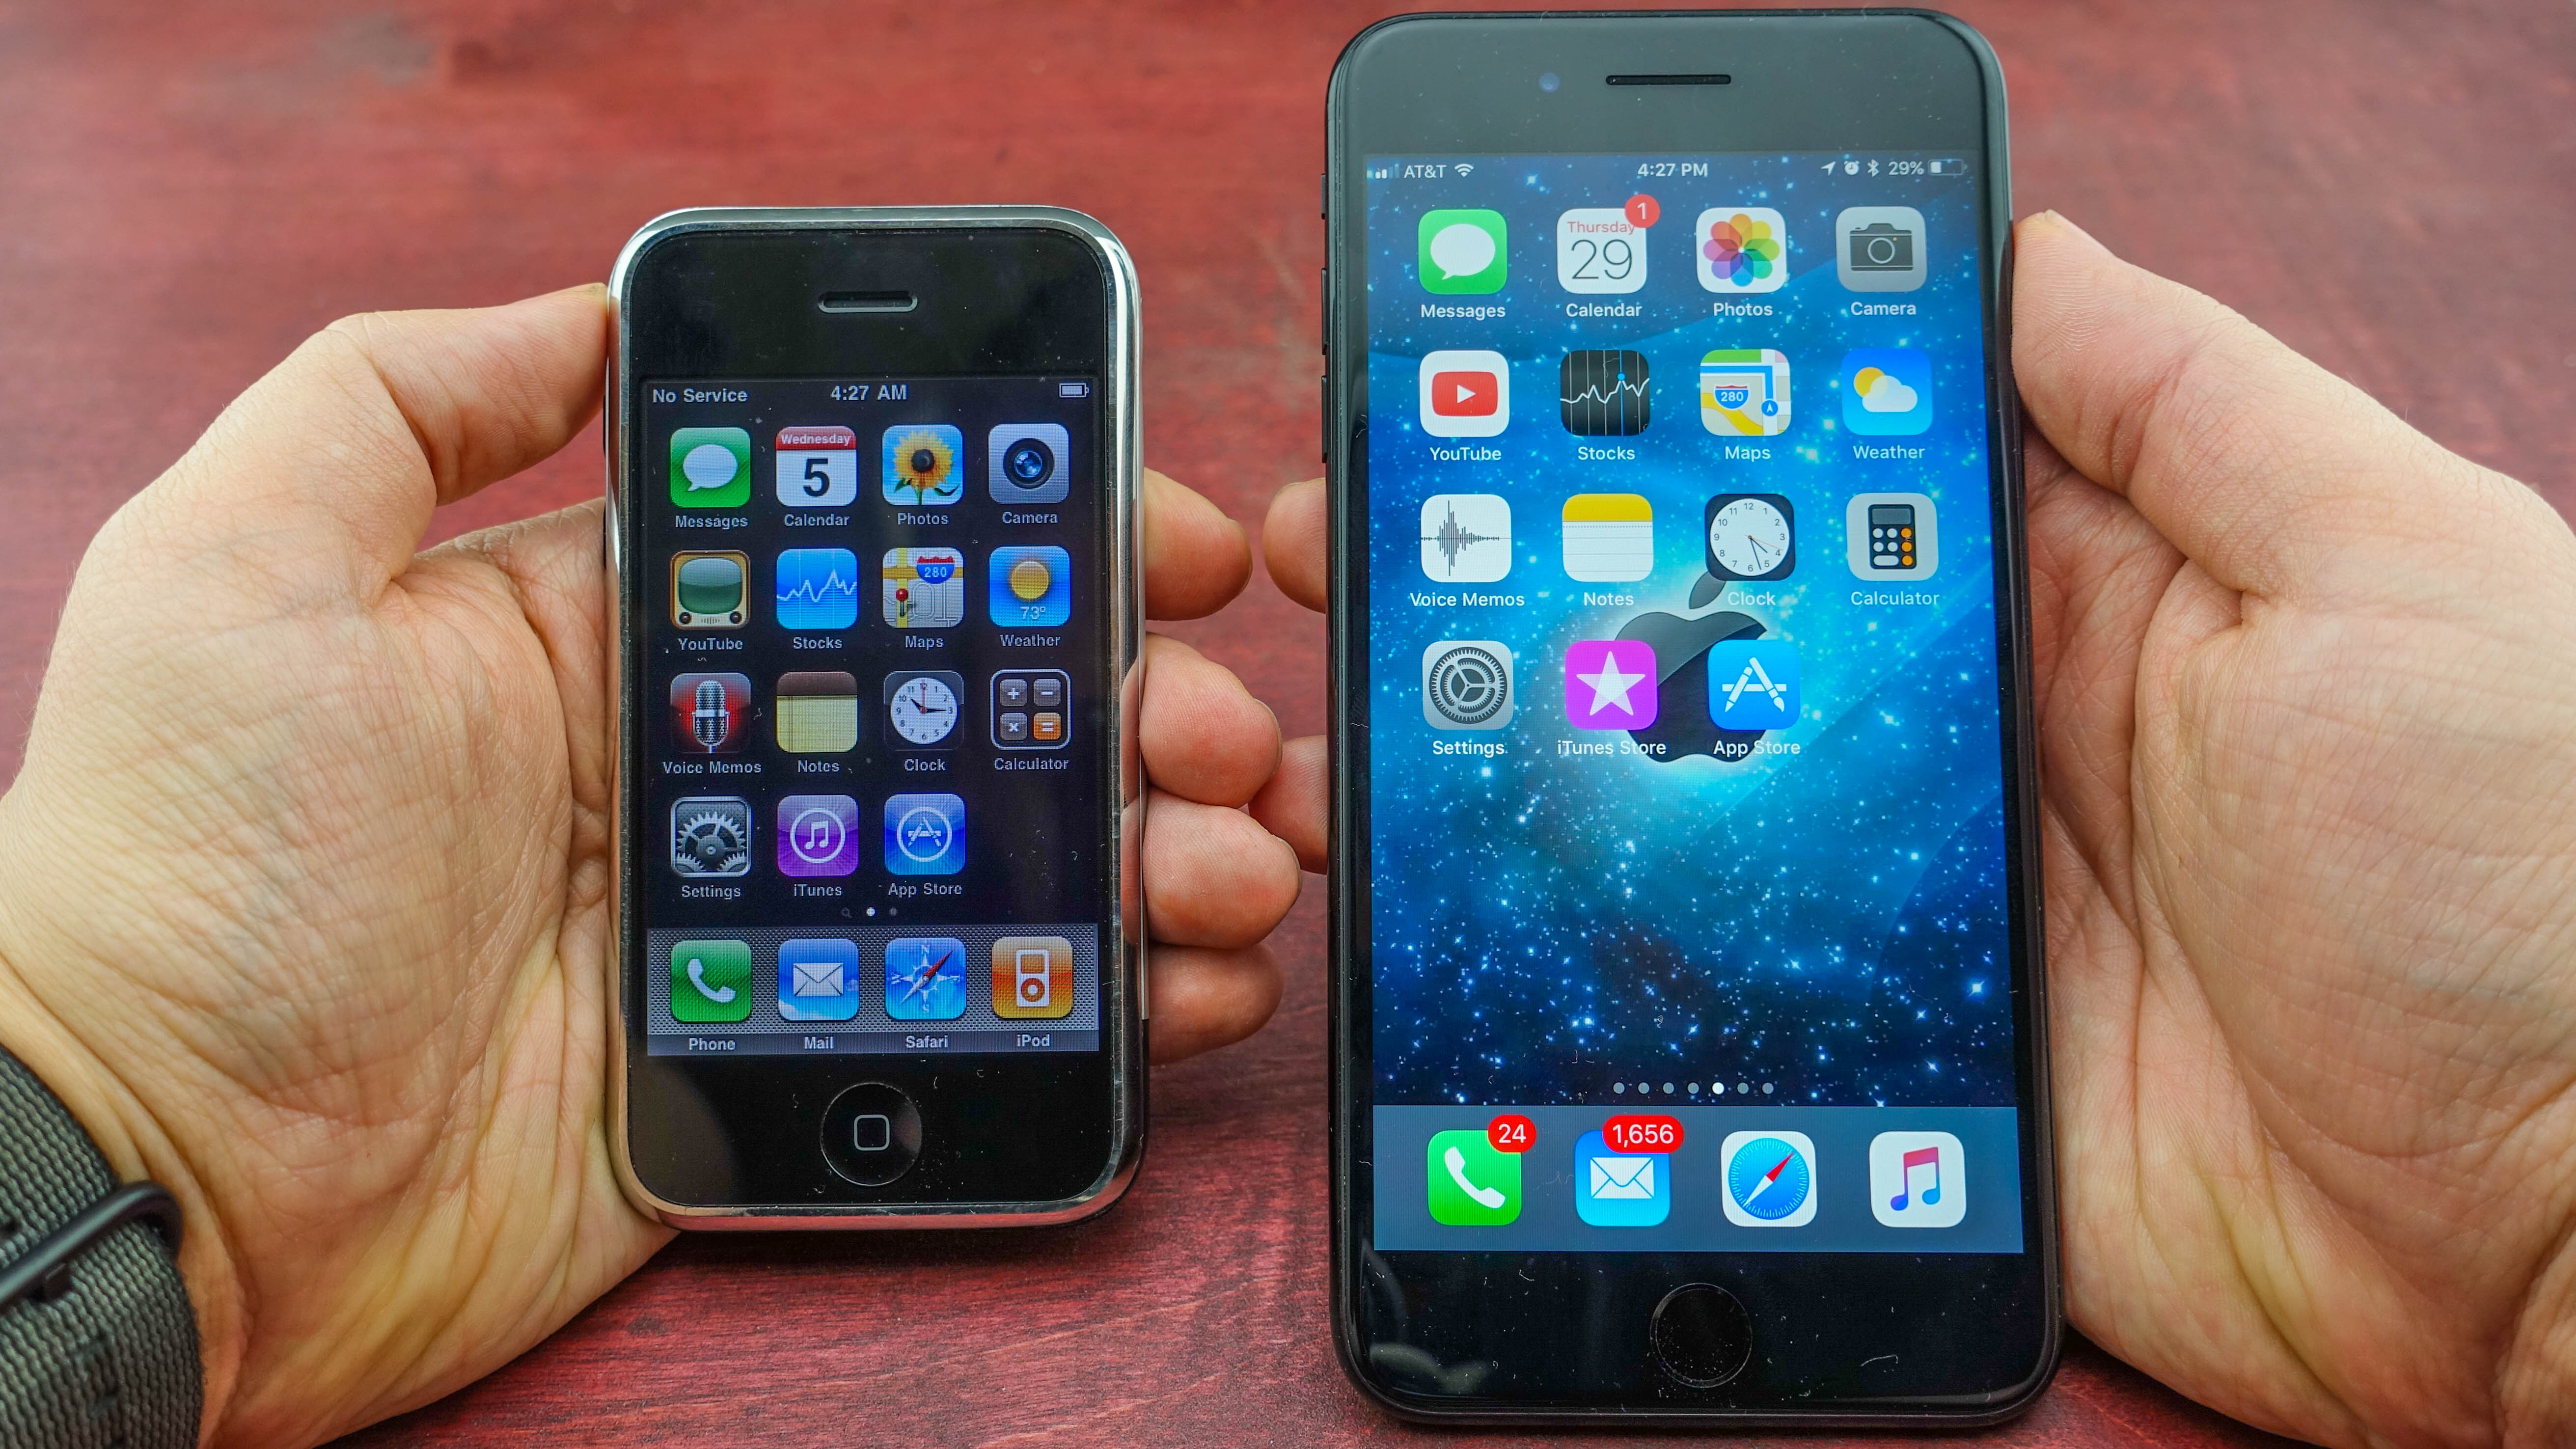 iPhone 1 vs iPhone 7 Plus: this is how far we've come in 10 years